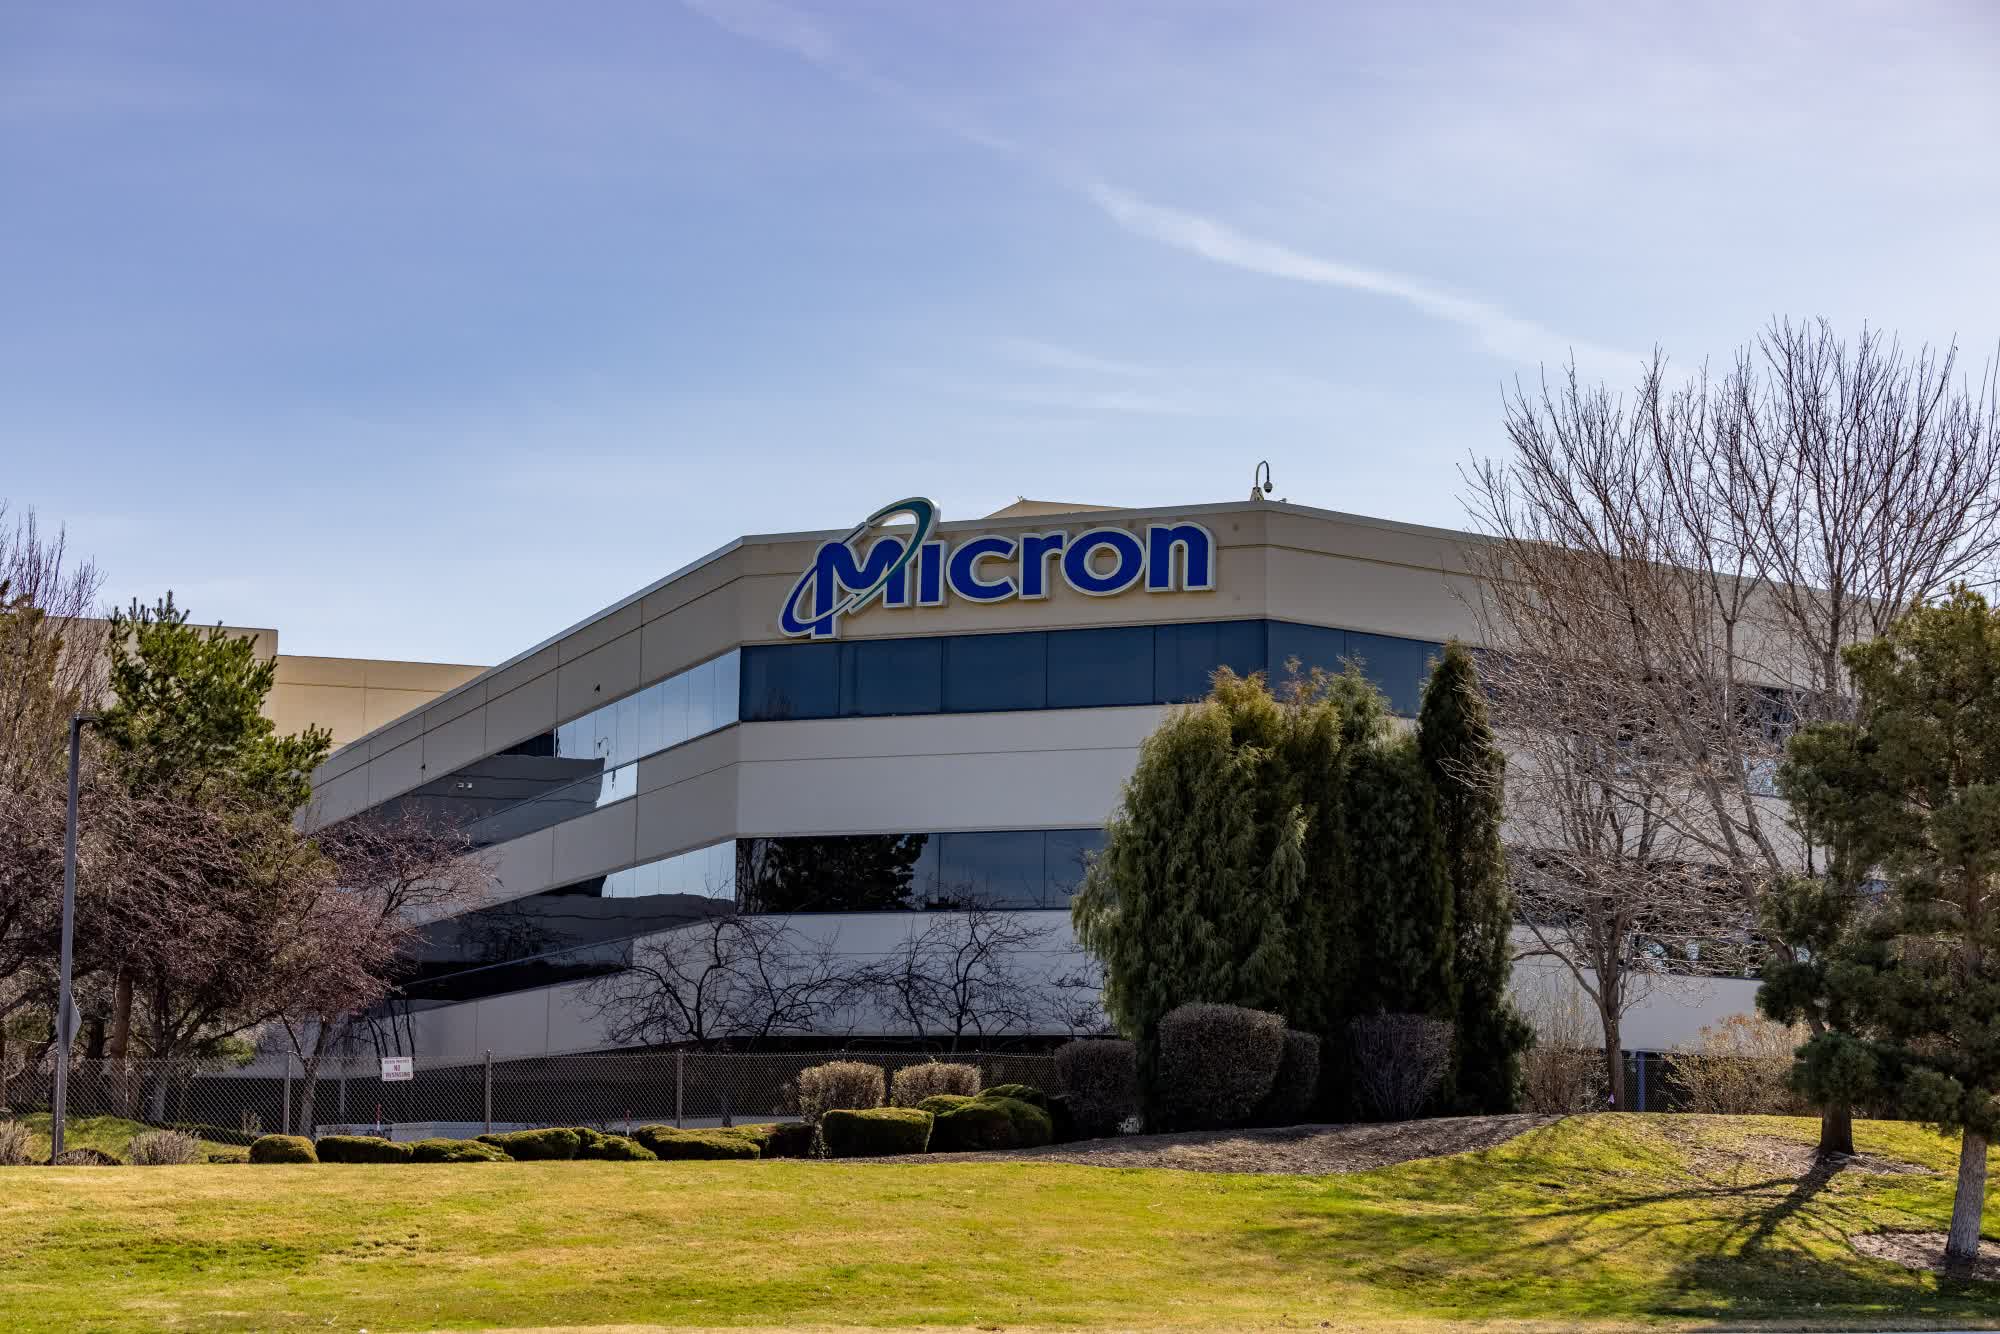 Micron foresees new quarterly losses, bets on HBM3 Gen2 tech and Nvidia partnership for the future